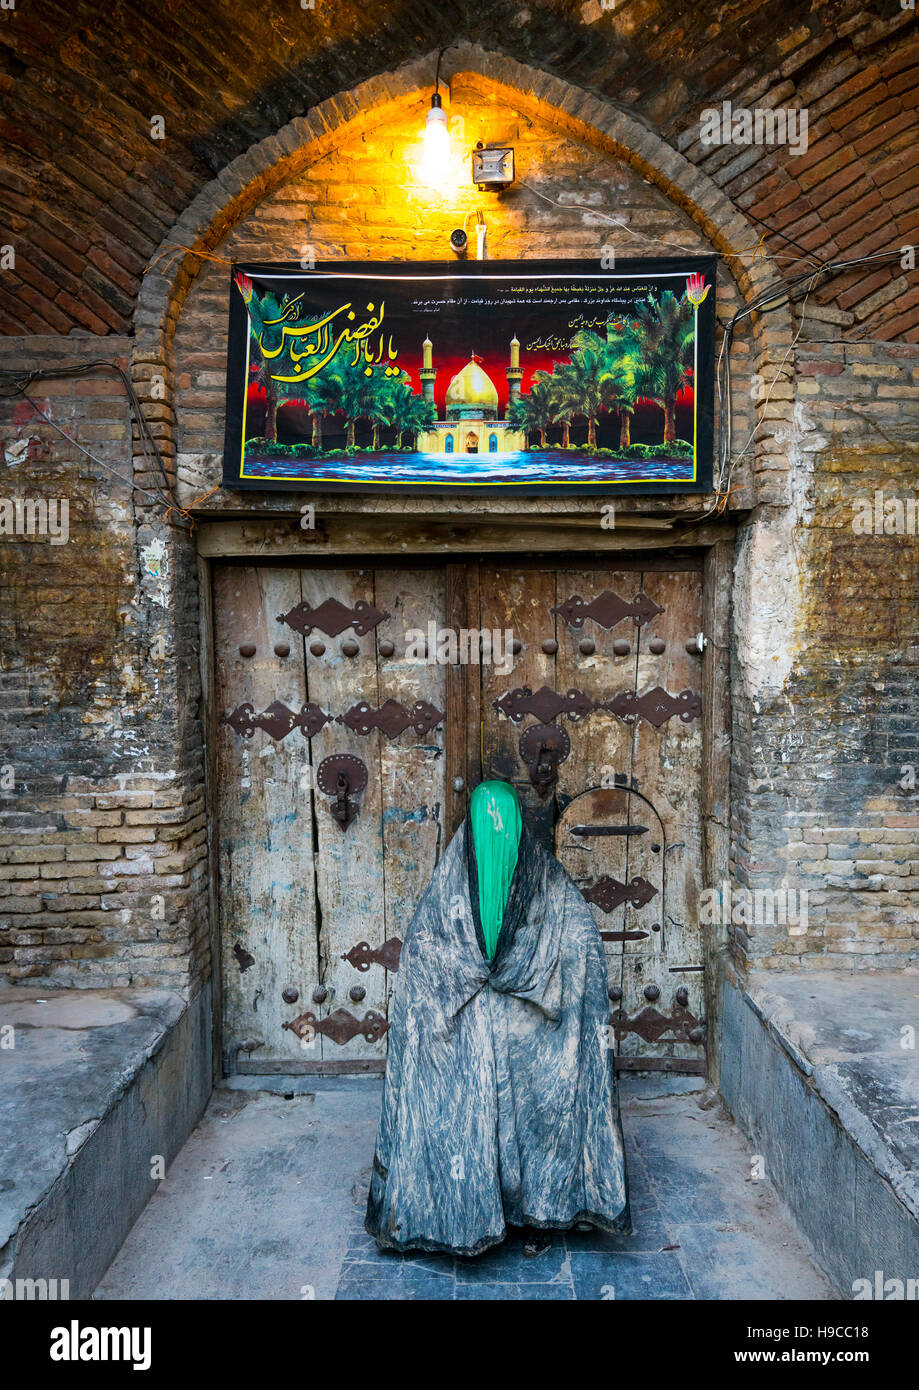 Iranian shiite muslim woman standing in front of an old wooden door after rubbing mud on her chador during the kharrah mali ritual to mark the ashura  Stock Photo